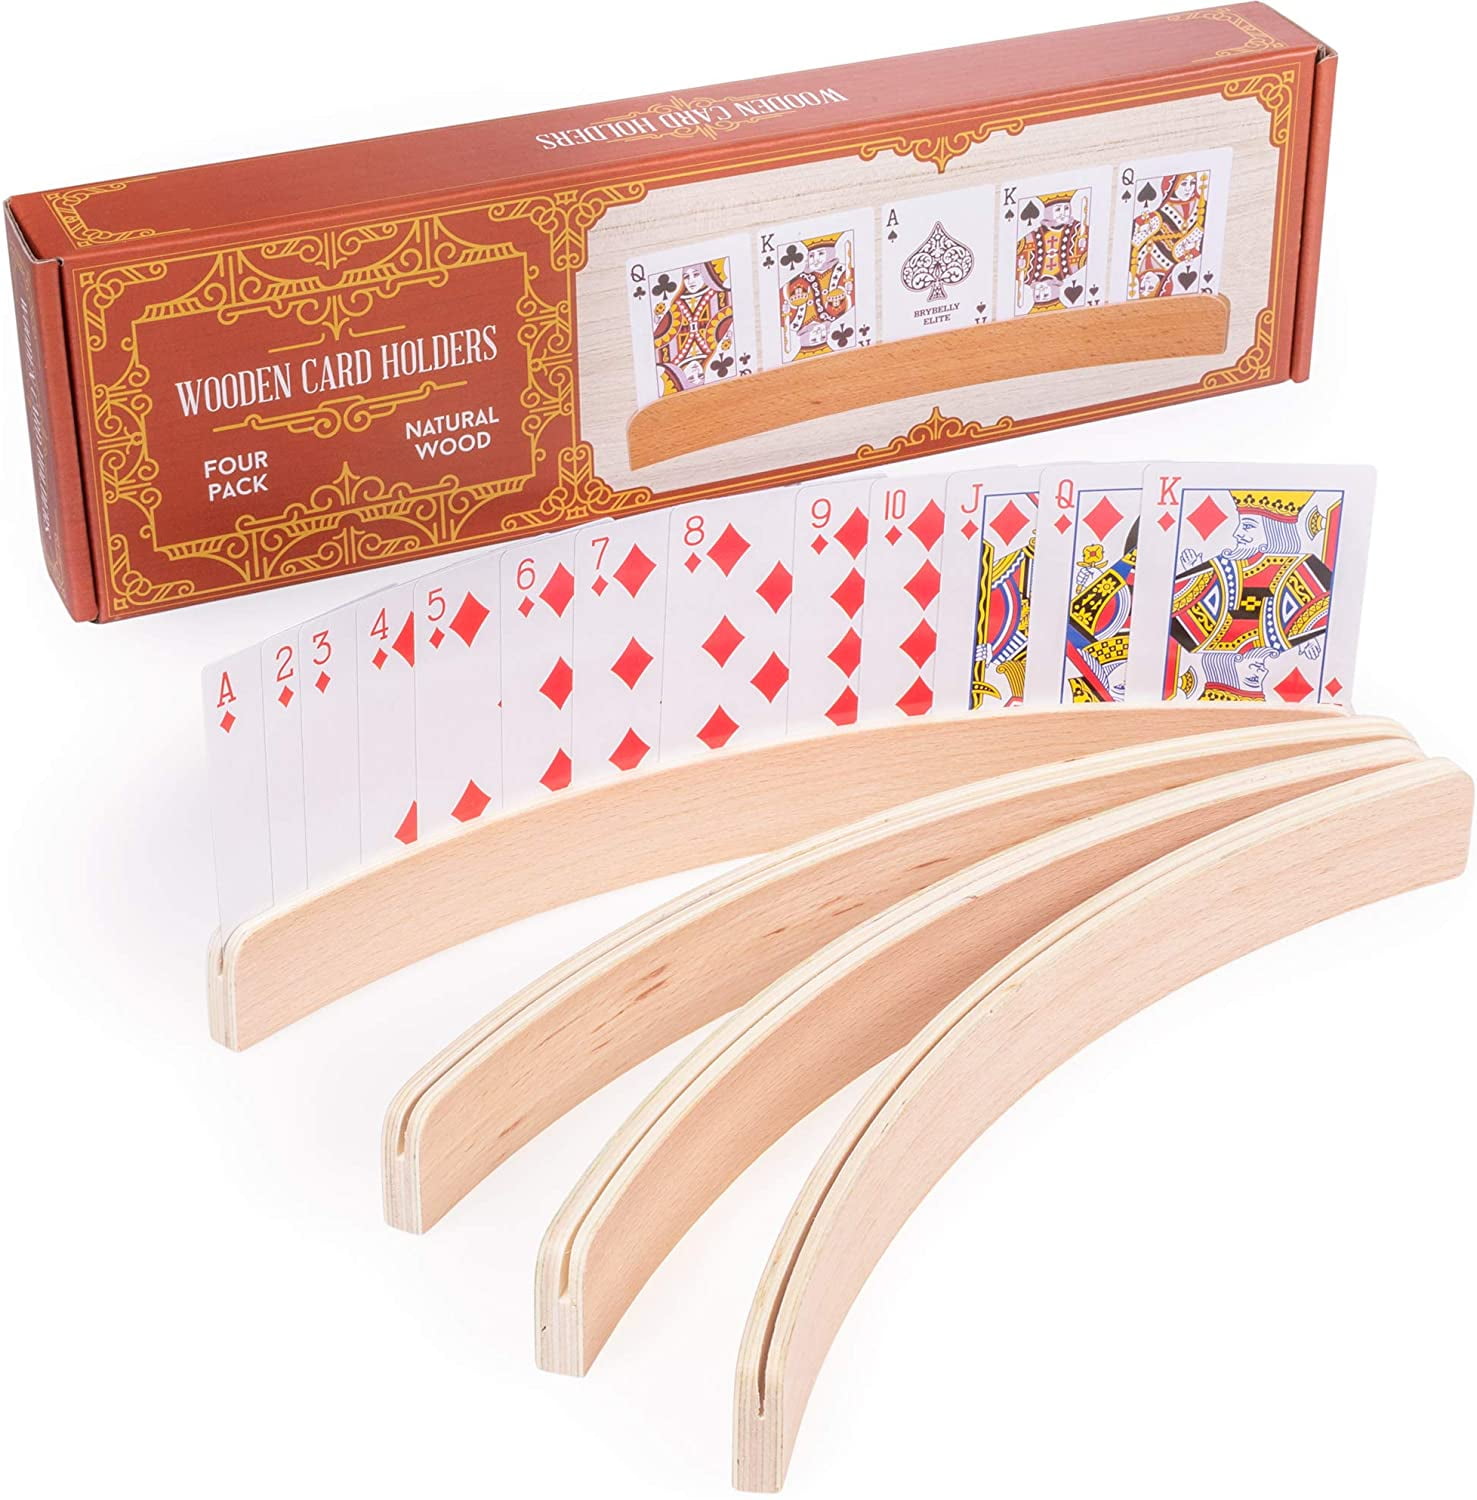 Details about   Playing card Holders poker base game organize hands for easy play poker stand.AU 